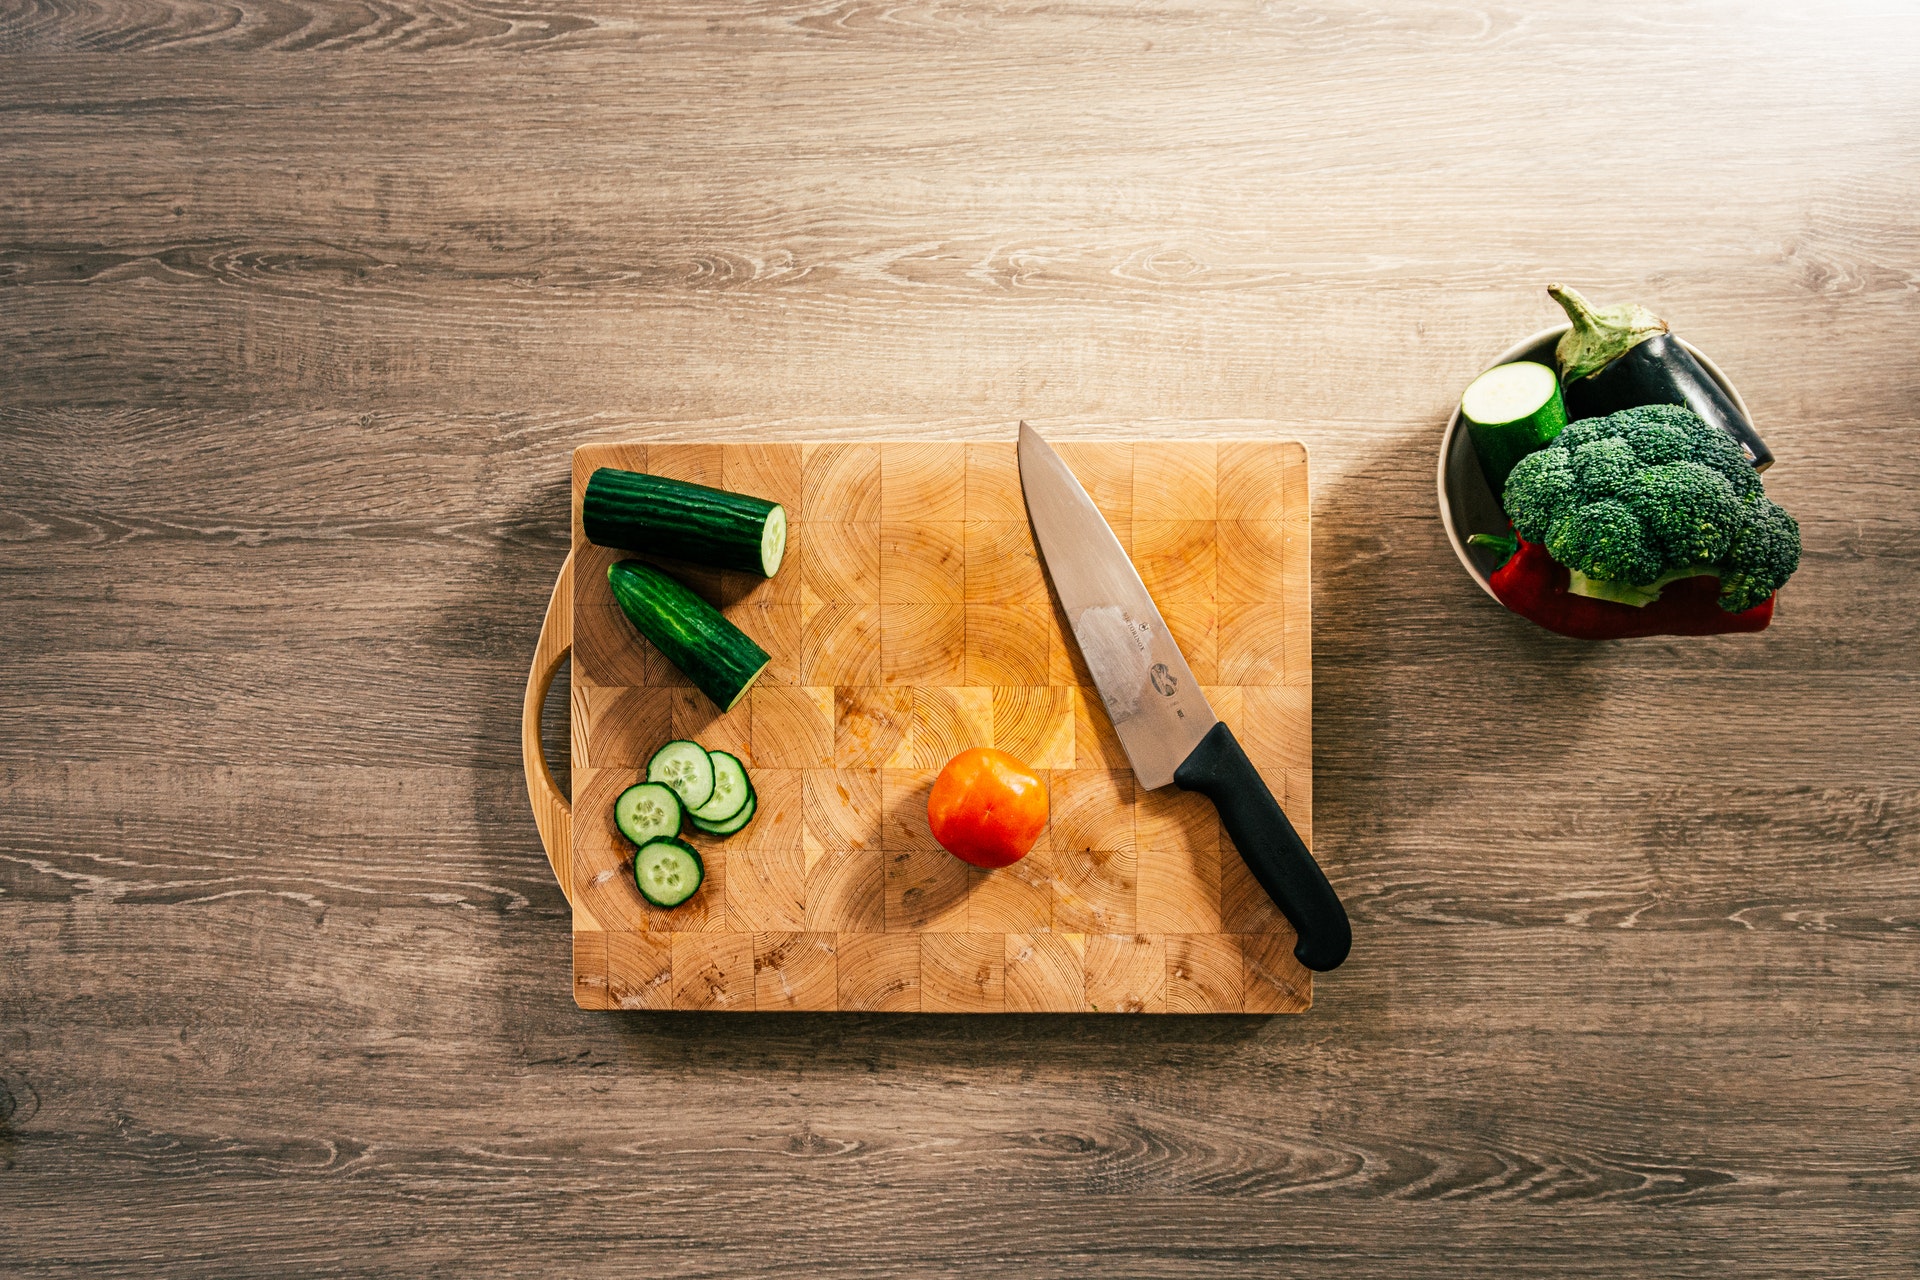 using knife, chopping board with vegetables and knife